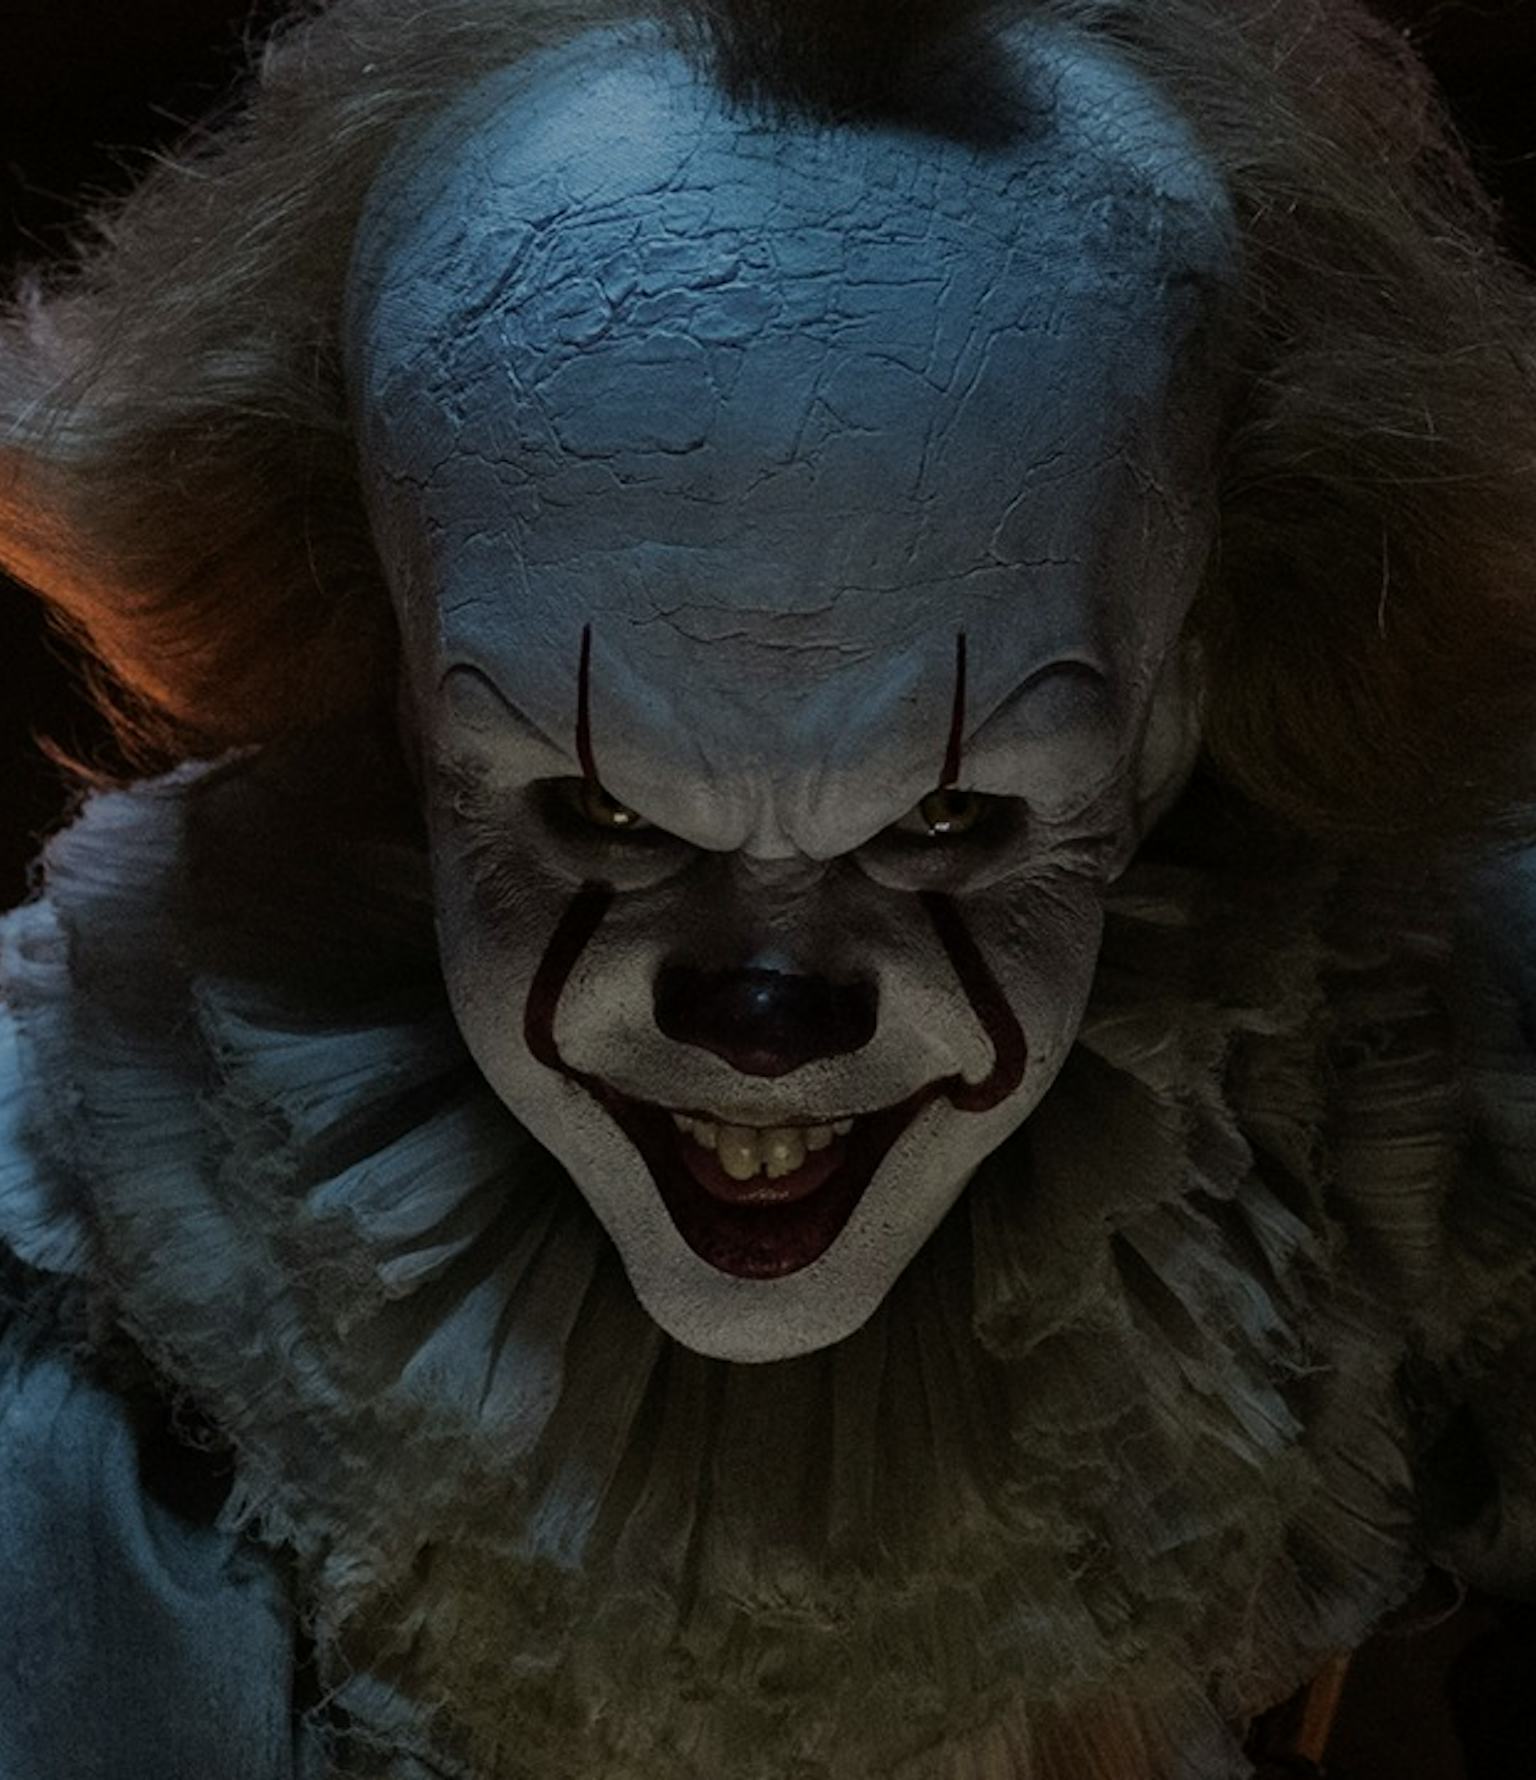 'It' Movie Ending Sets Up Stephen King's Next Book Nicely
